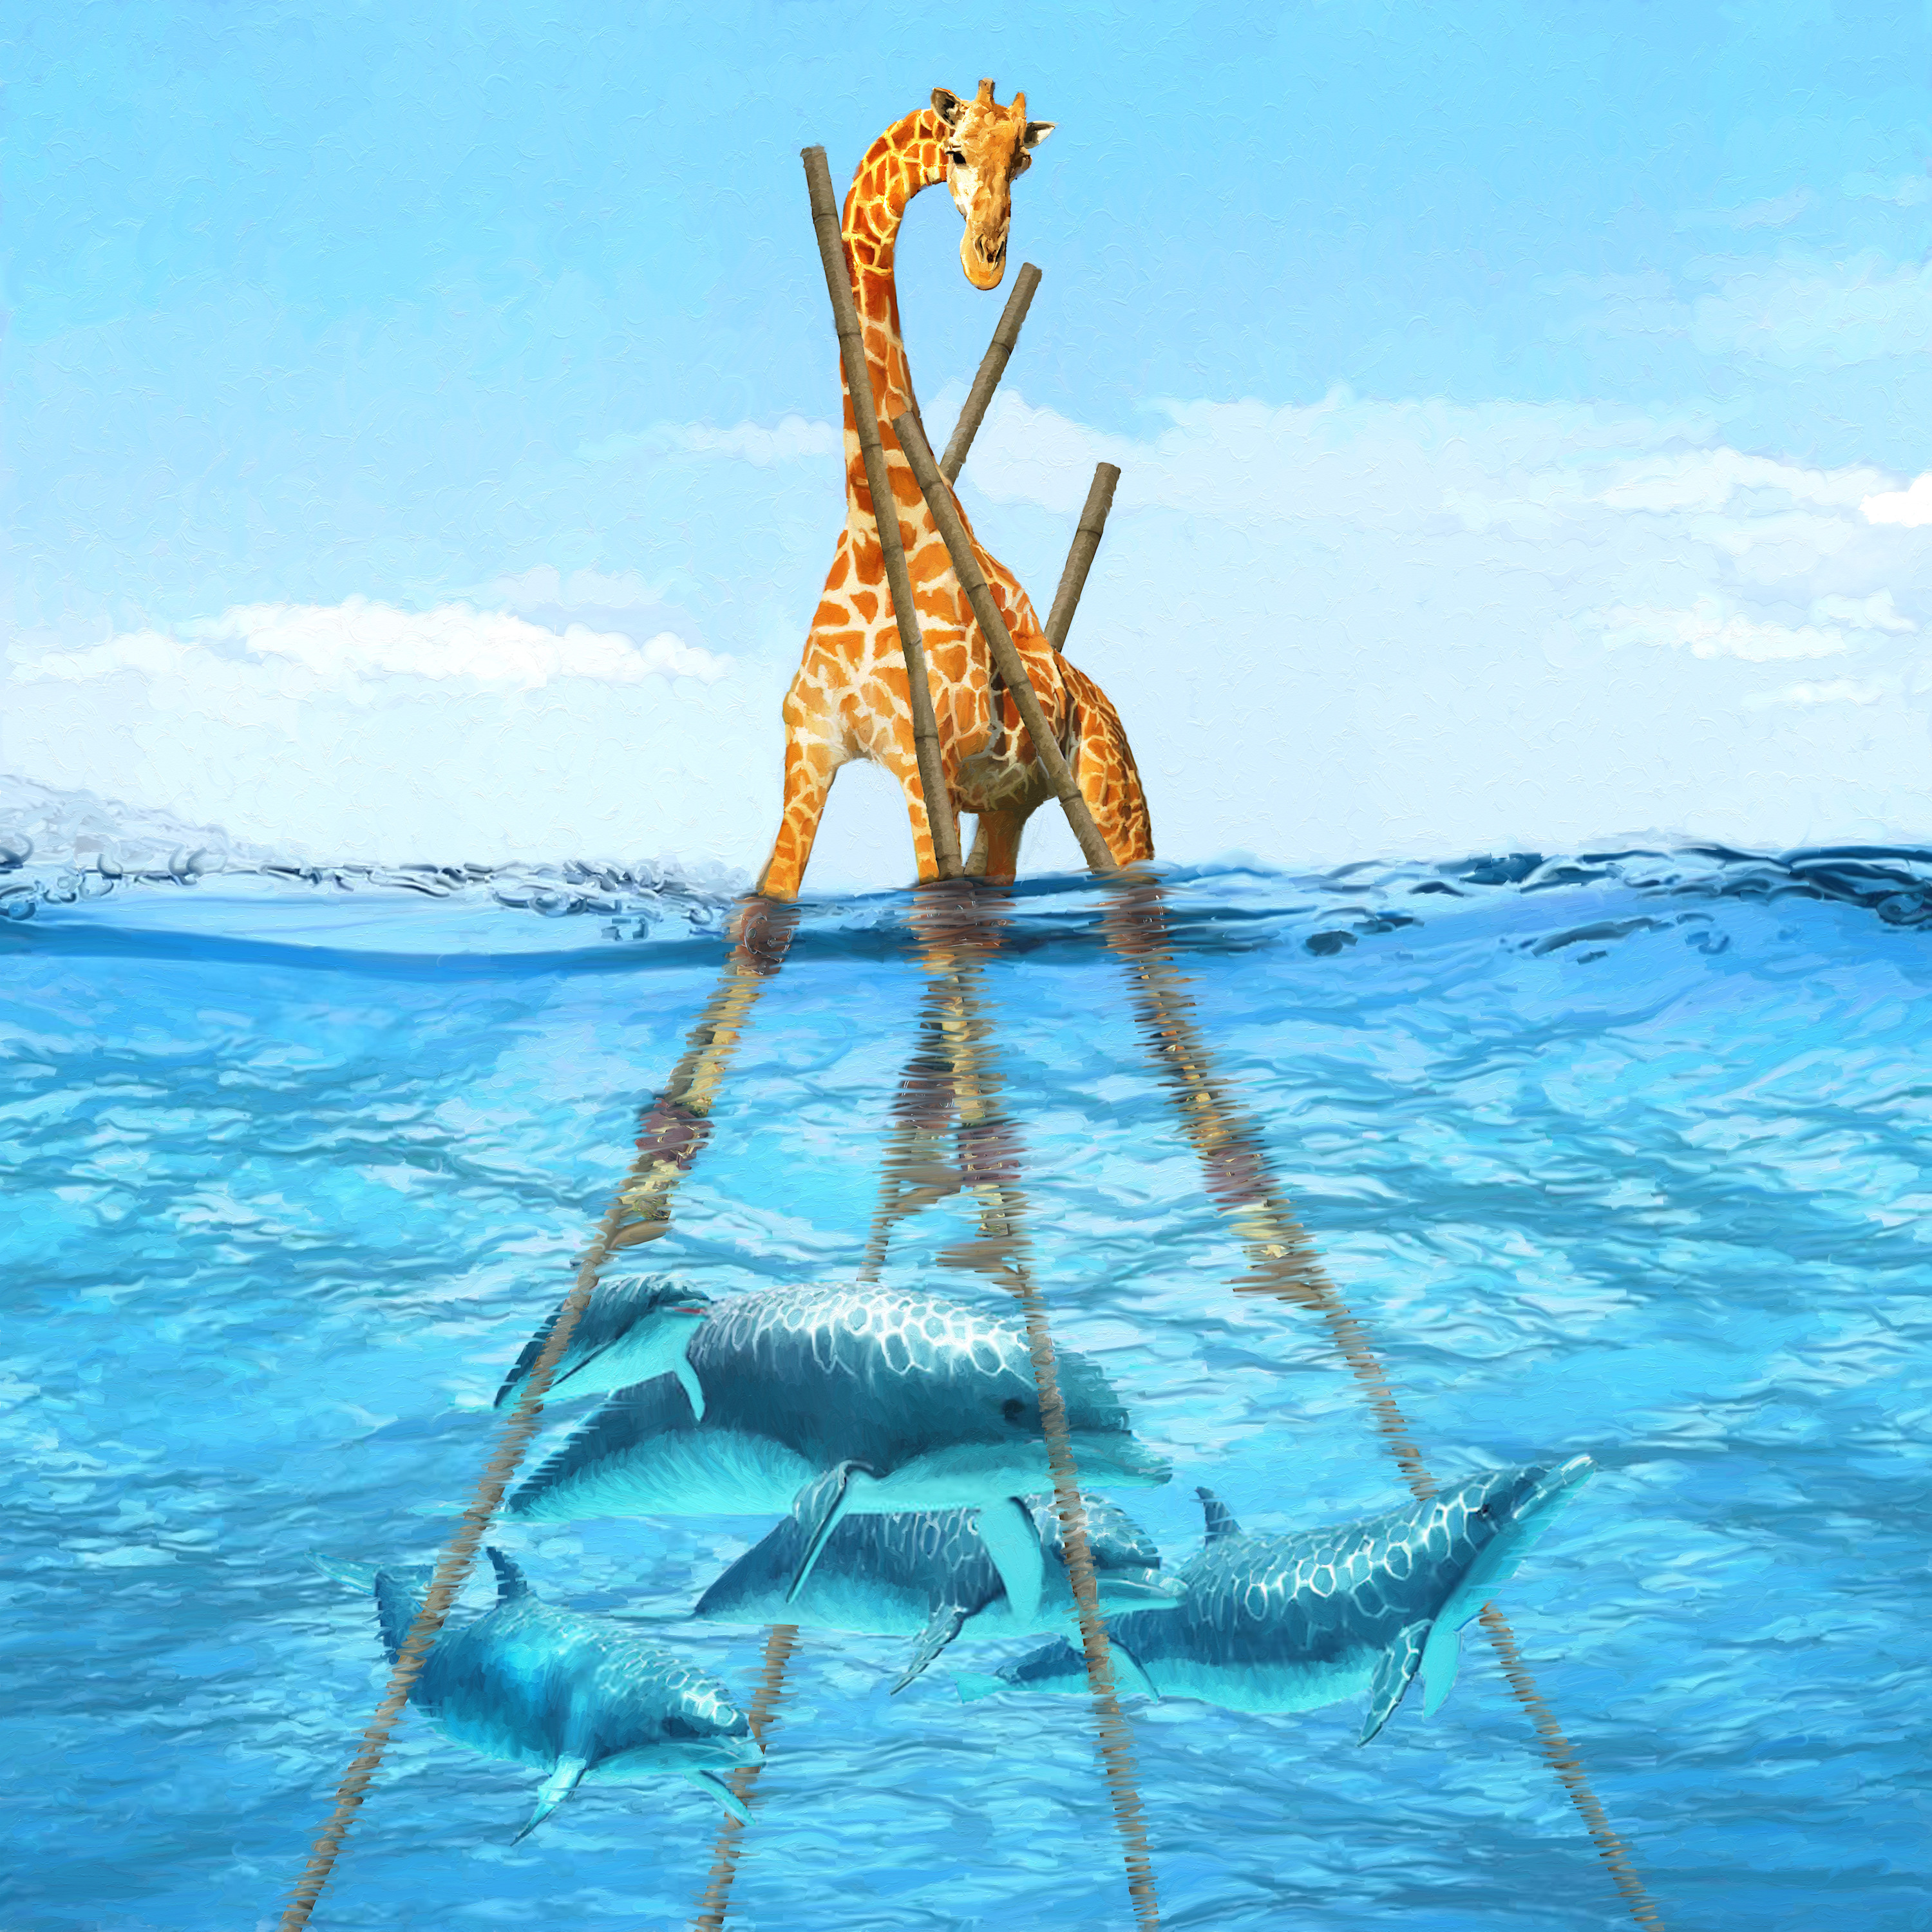 The giraffe and the dolphins bjbbaq